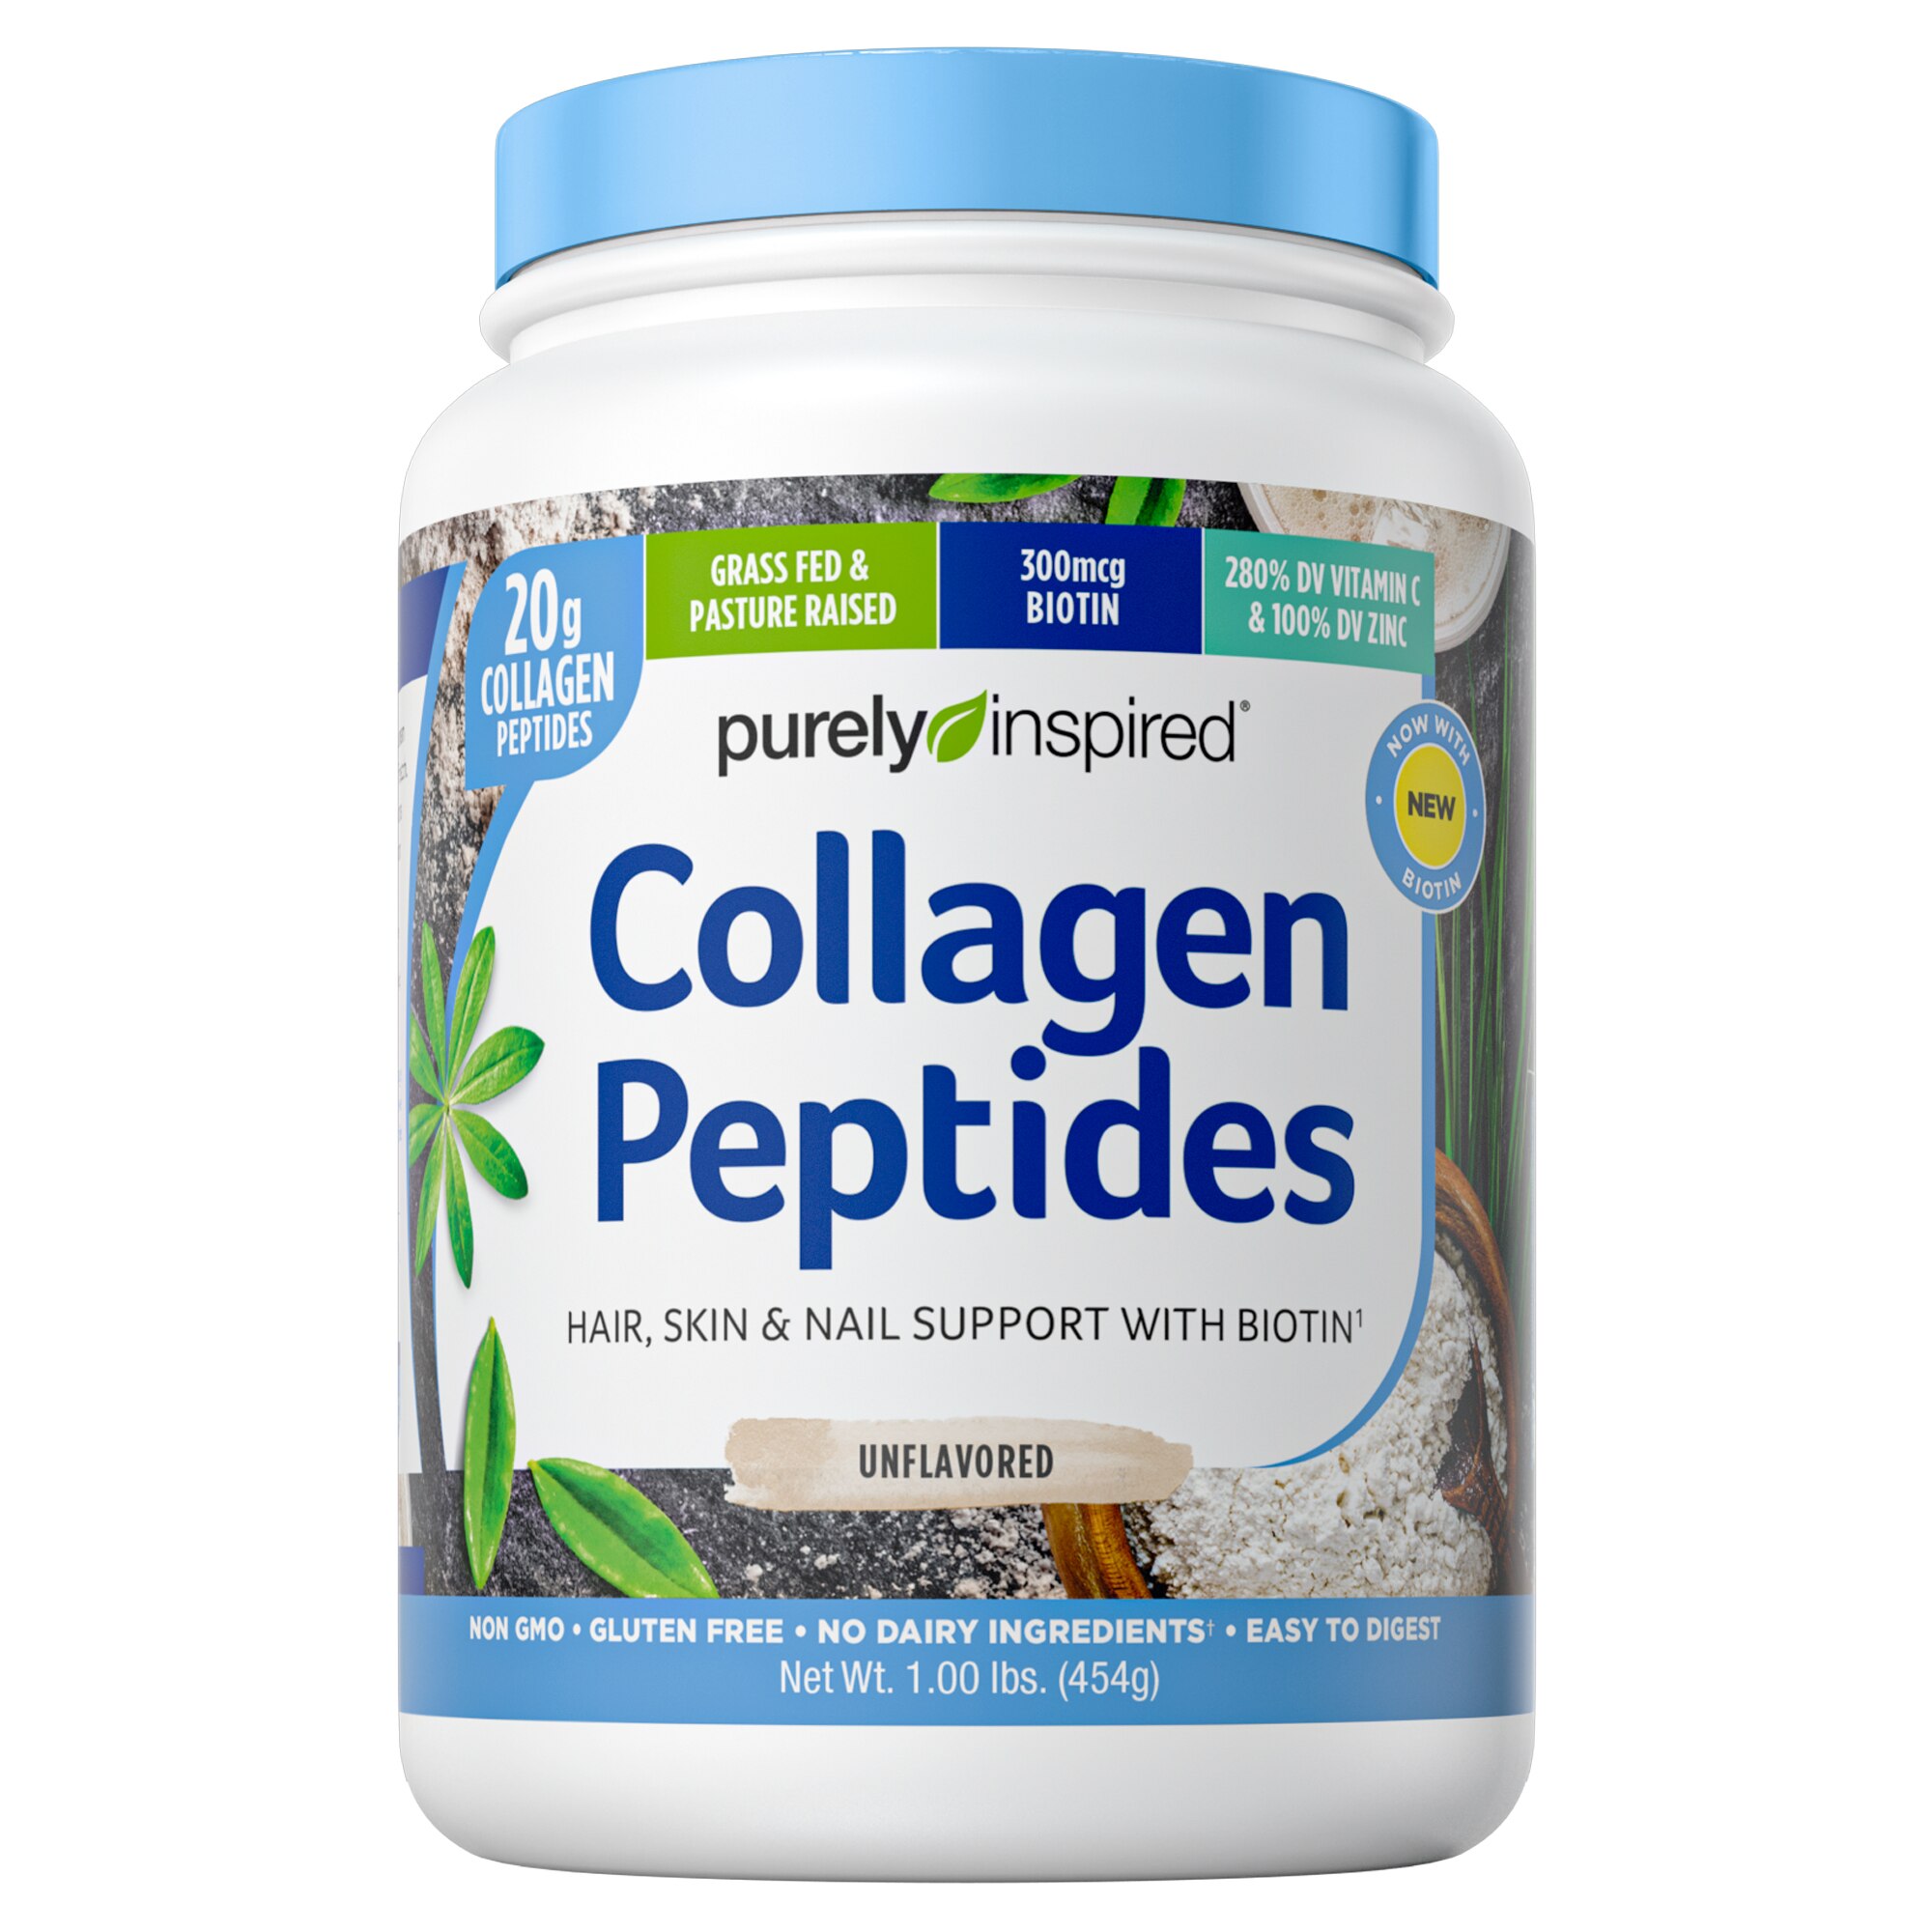 Purely Inspired Collagen Peptides, Grass Fed & Pasture Raised, Unflavored